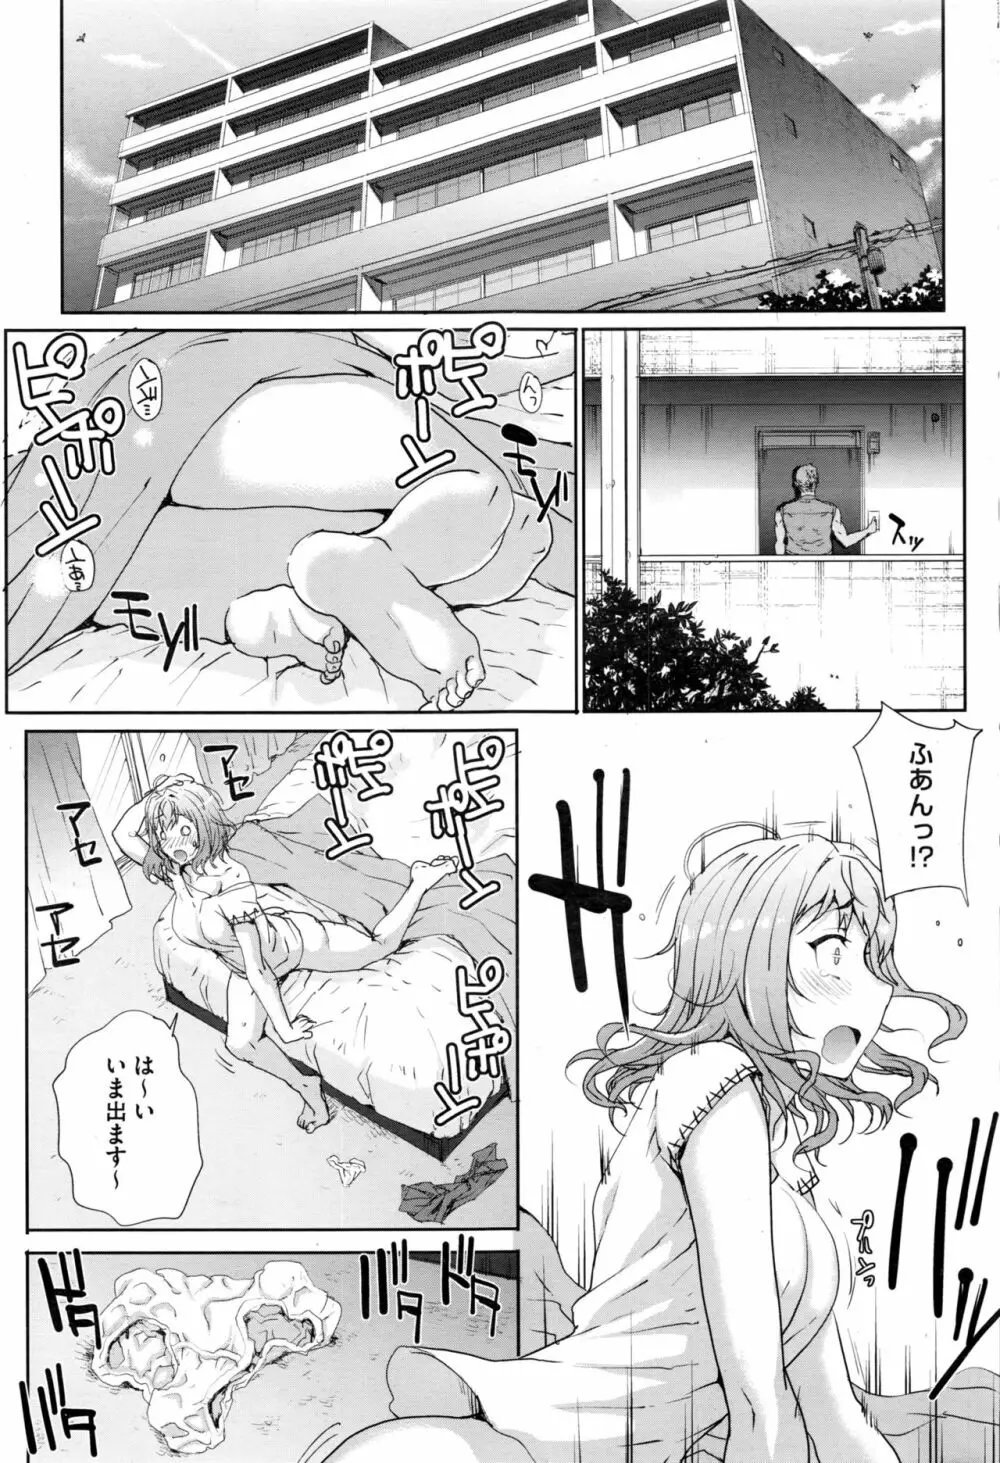 [Carn] Tanshinfunin ~Sisters~ Ch 1-7 3ページ